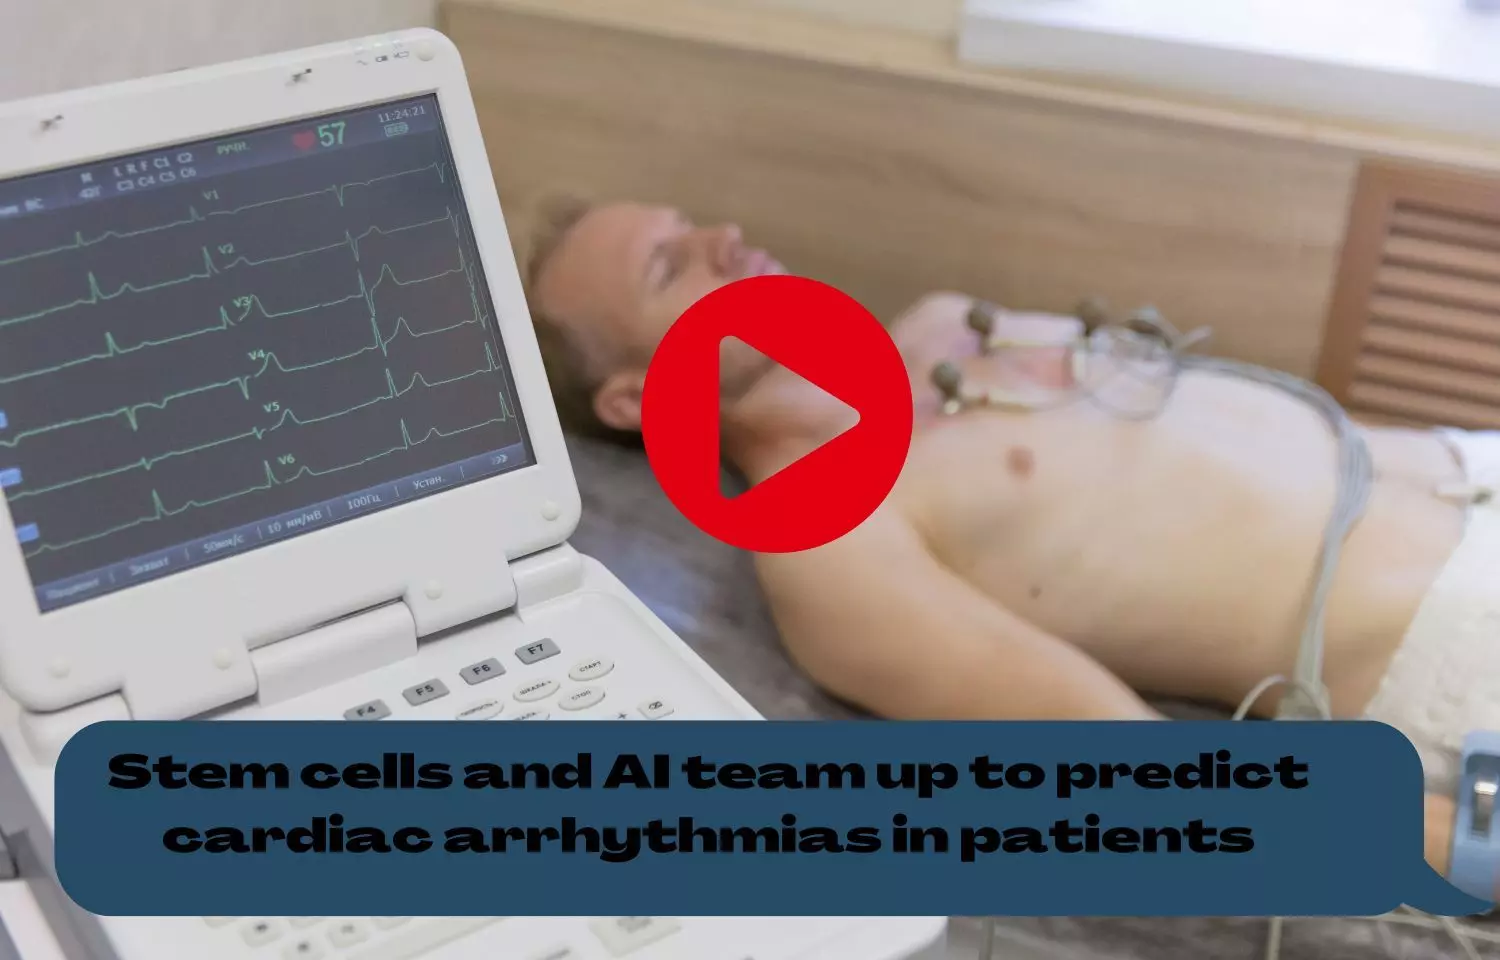 Stem cells and AI team up to predict cardiac arrhythmias in patients